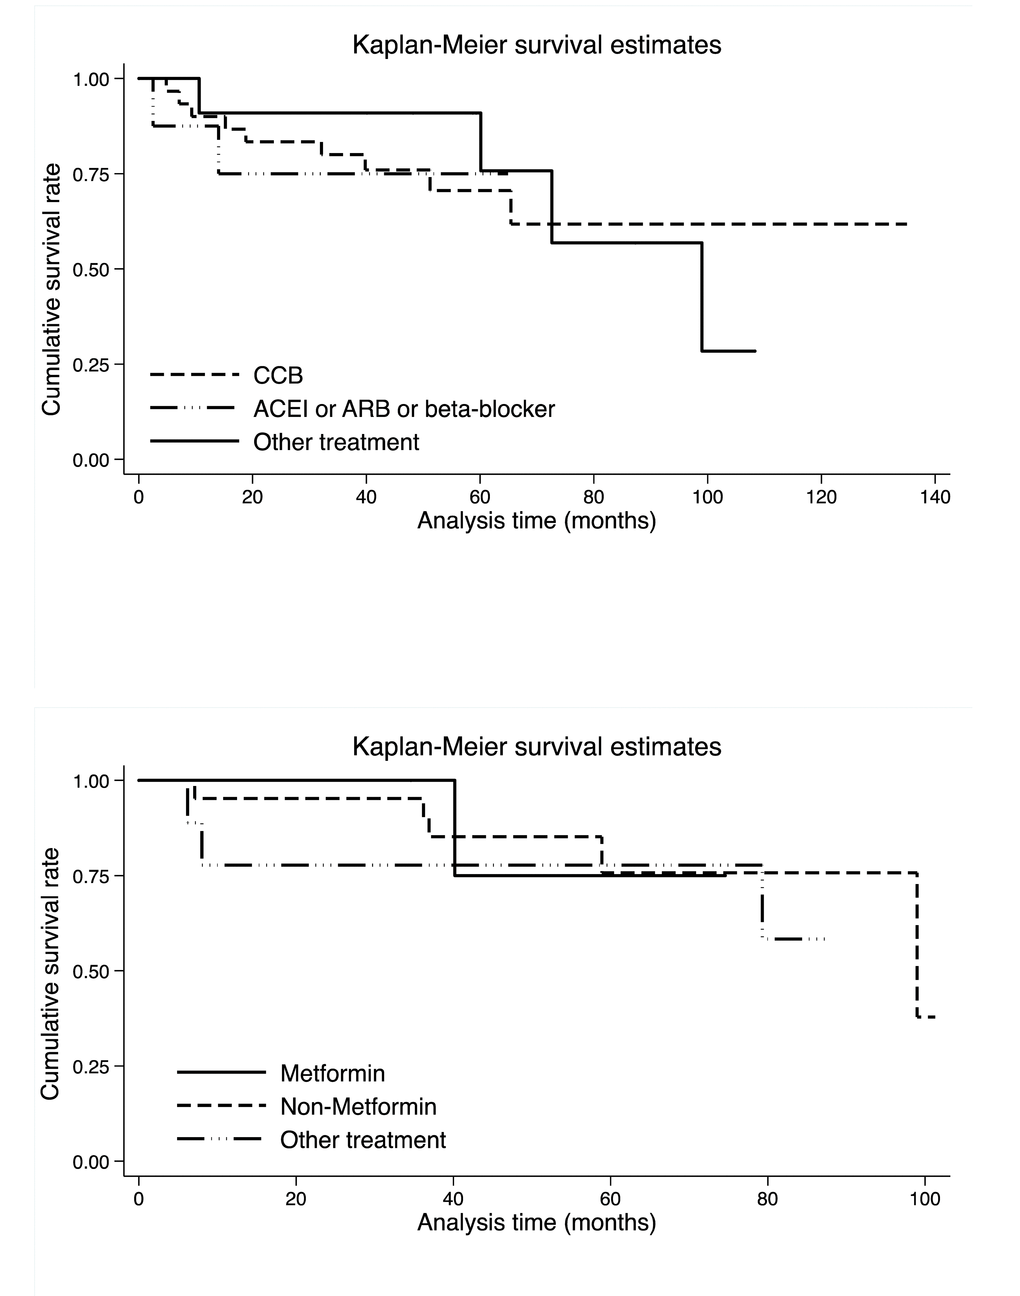 Kaplan-Meier survival curves per antihypertensive (the upper panel) and antidiabetic (the lower panel) medications. Abbreviations: CCB, calcium channel blocker; ACEI, angiotensin converting enzyme inhibitor; ARB, angiotensin receptor blocker. There were 30, 8 and 11 colorectal cancer patients who took ACEI or ARB or beta-blocker, CCB and other antihypertensive drugs, respectively. There were 5, 21 and 9 colorectal cancer patients who took metformin, non-metformin and other antidiabetic drugs, respectively. Log-rank test was not significant for both antihypertensive (p: 0.978) and antidiabetic (p: 0.778) medications.